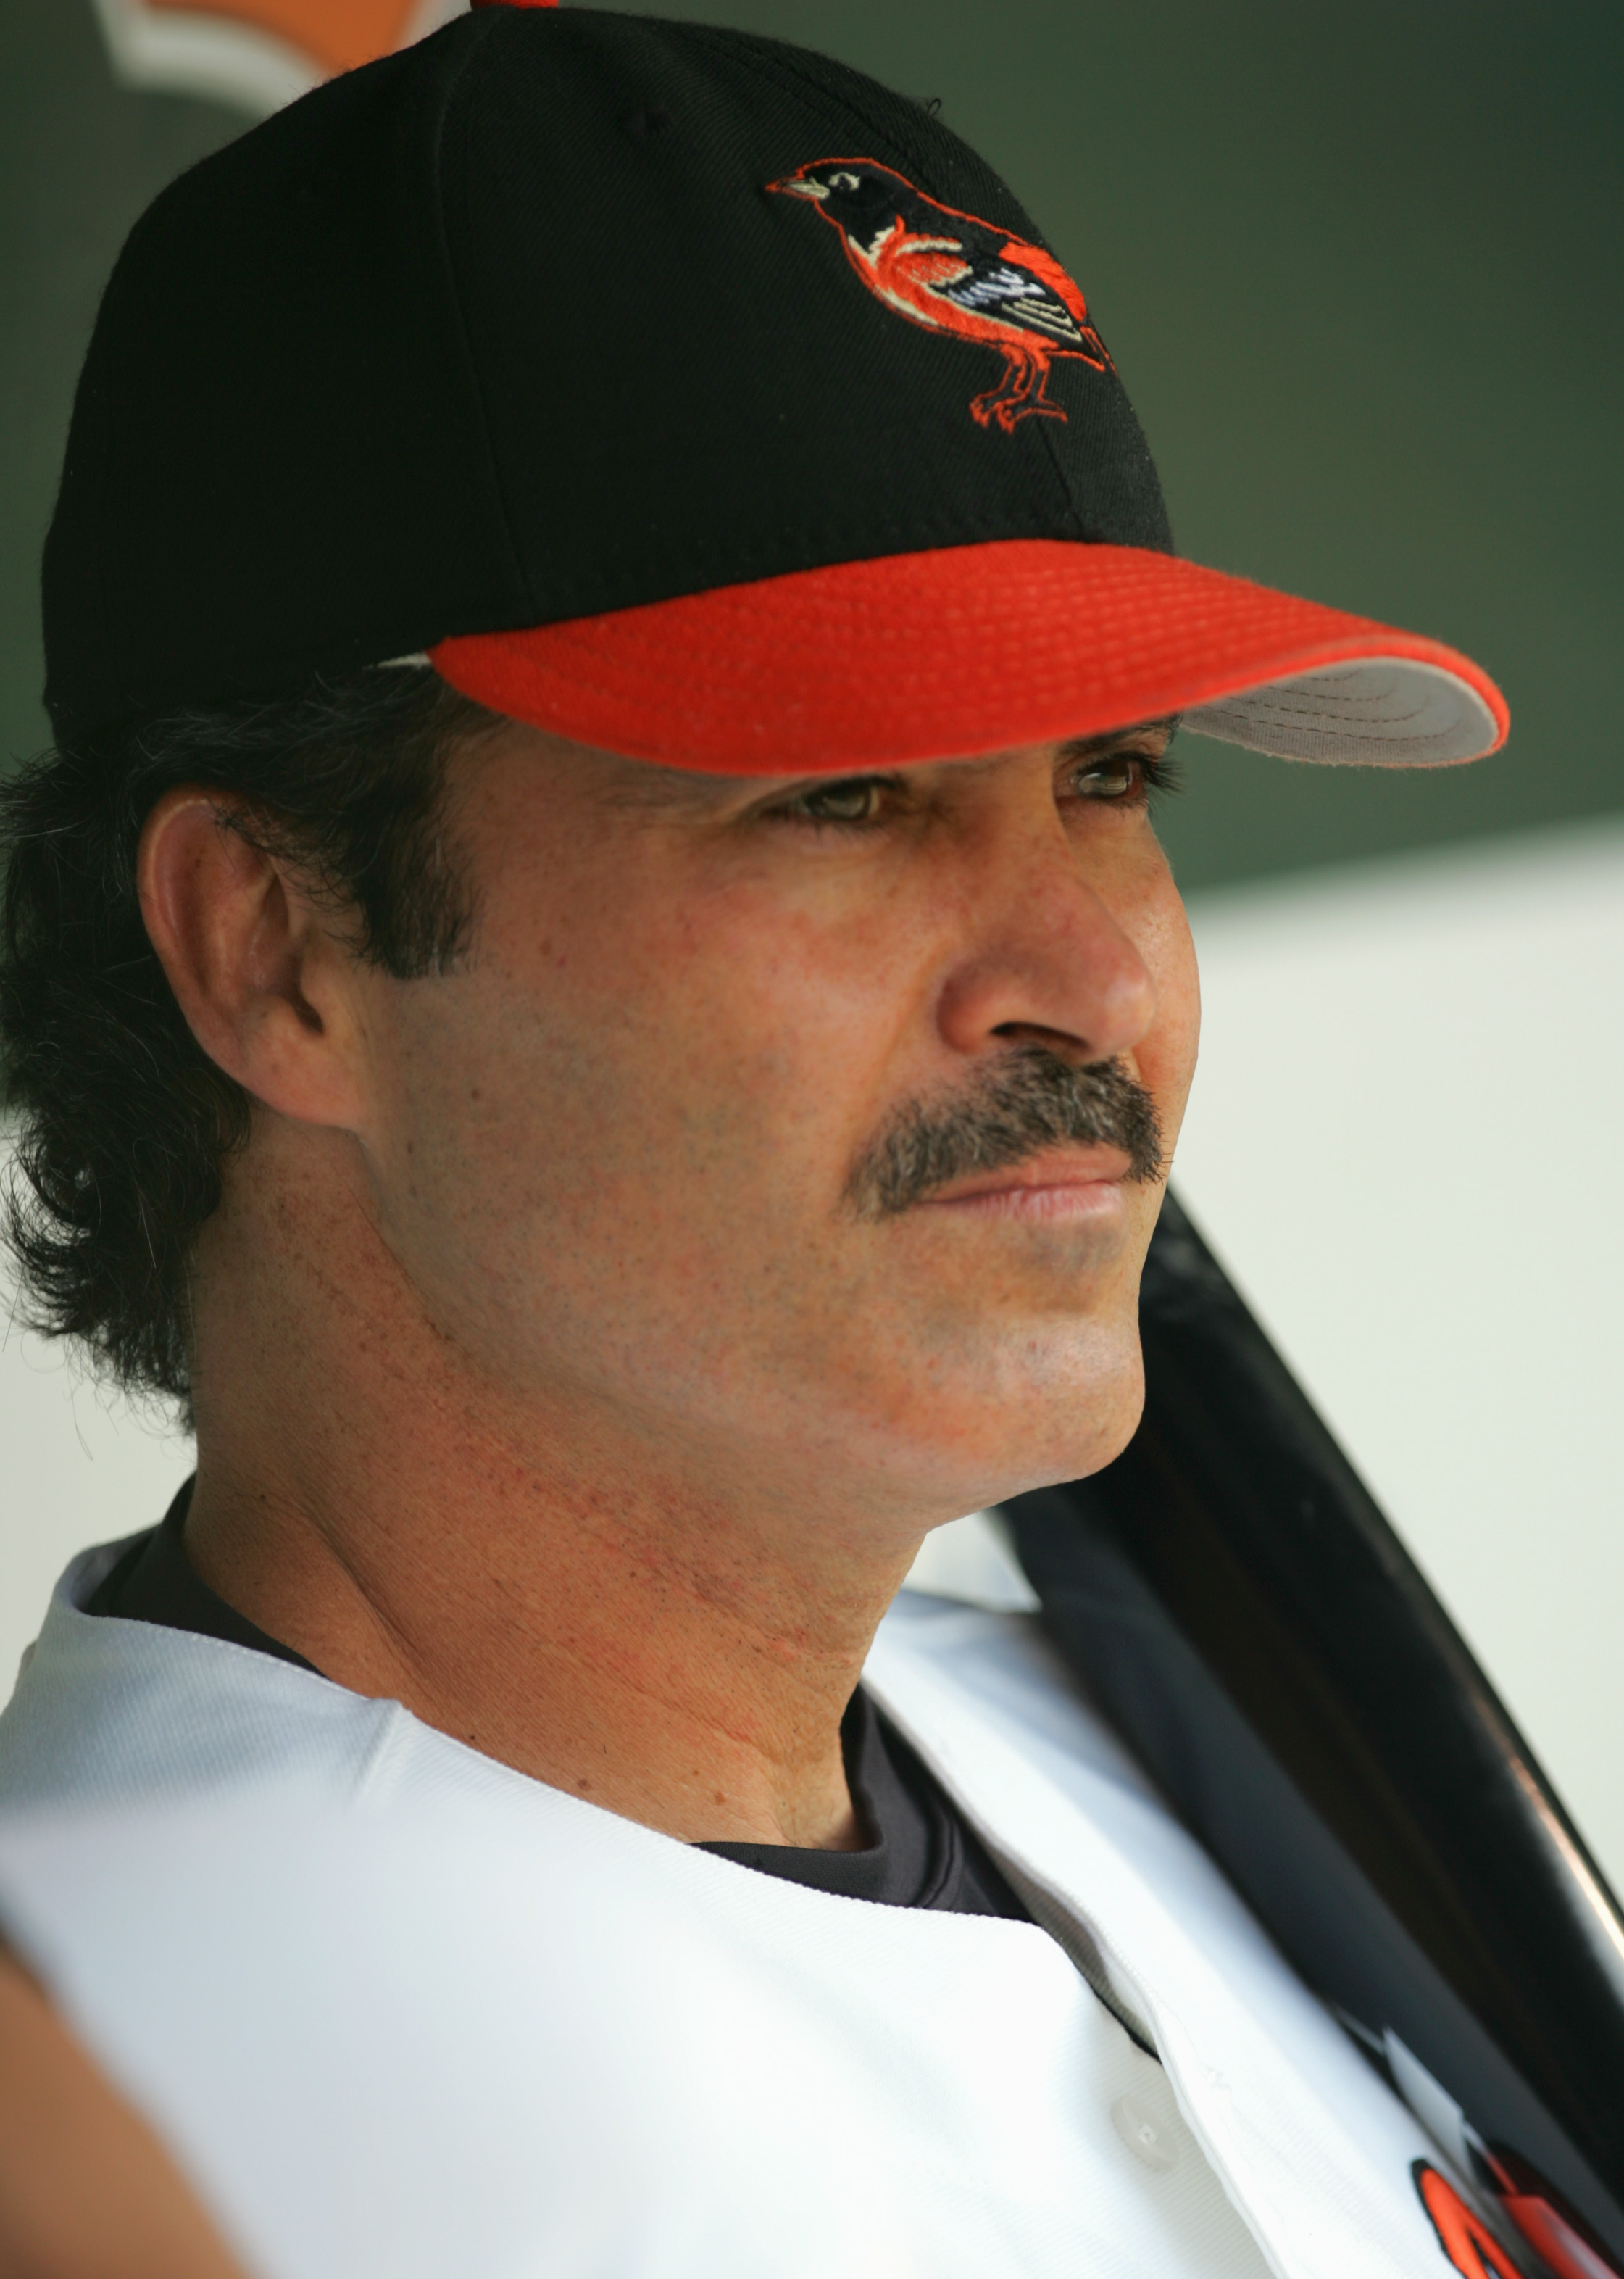 BALTIMORE, MD - AUGUST 29:  Rafael Palmeiro #25 of the Baltimore Orioles looks on from the dugout during the game against the Oakland Athletics on August 29, 2005 at Camden Yards in Baltimore, Maryland.  The A's won 10-5. (Photo By Jamie Squire/Getty Imag